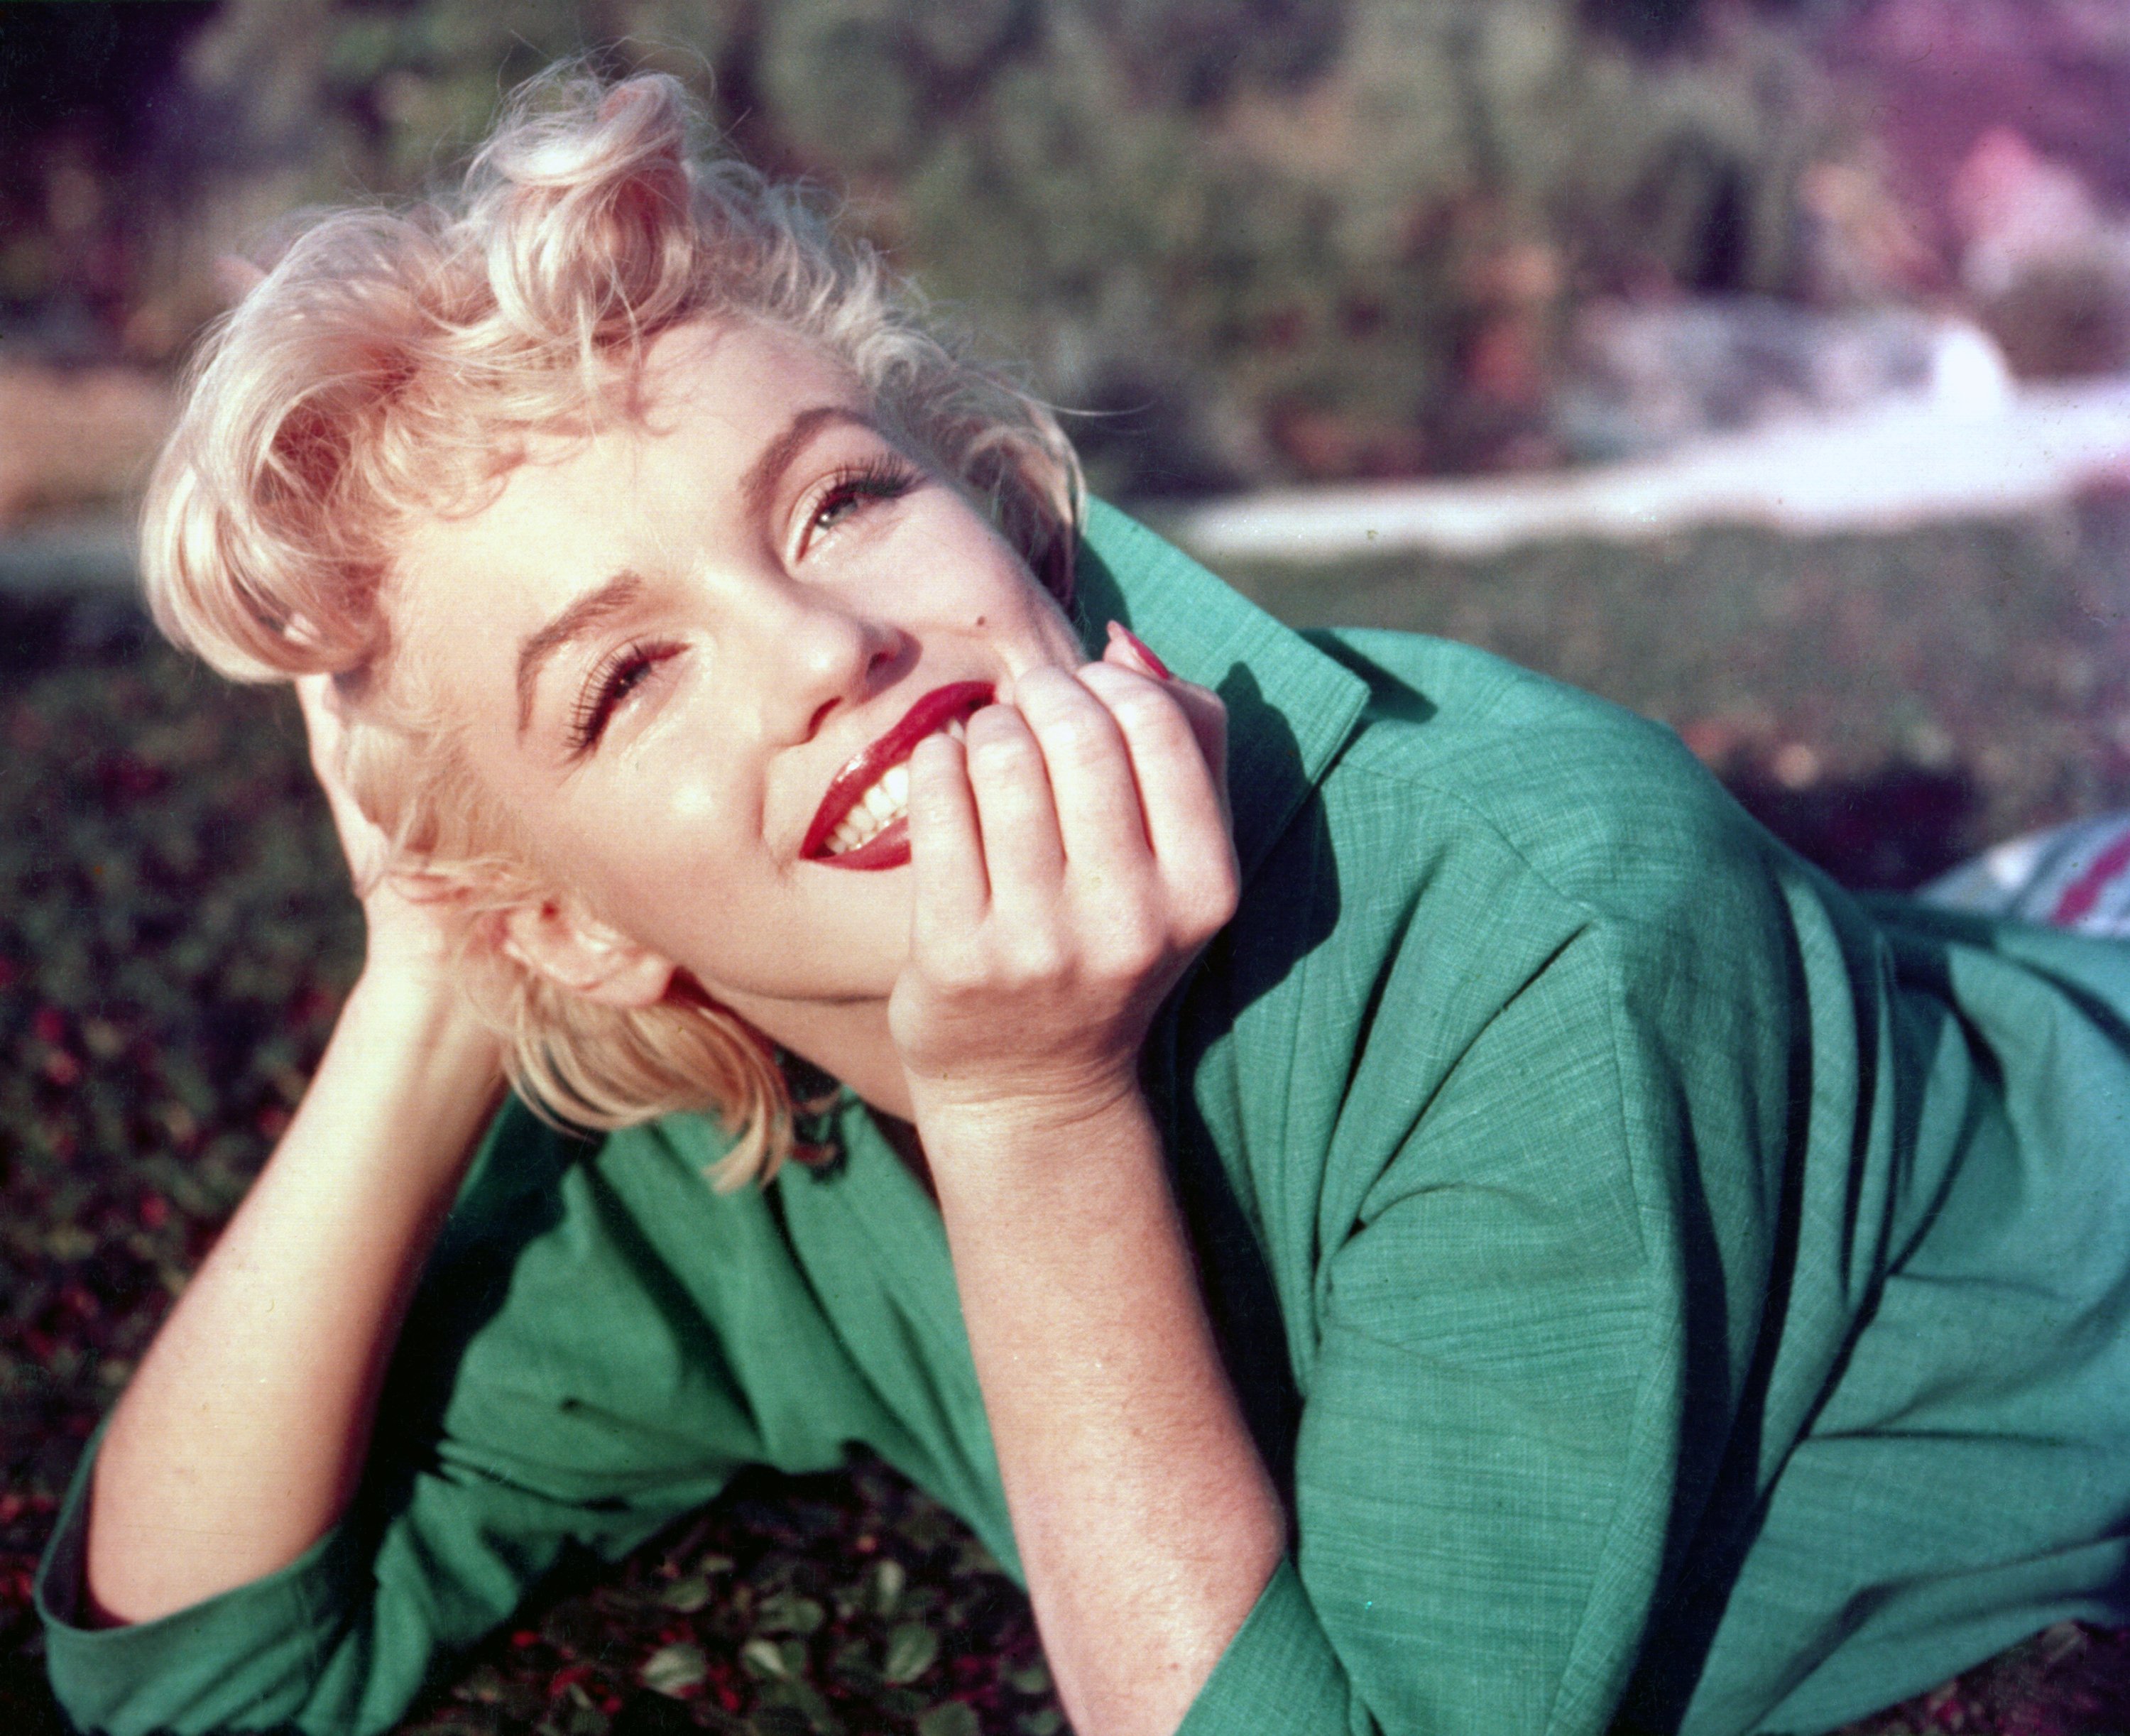 Actress Marilyn Monroe poses for a portrait laying on the grass in 1954 in Palm Springs, California| Source: Getty Images